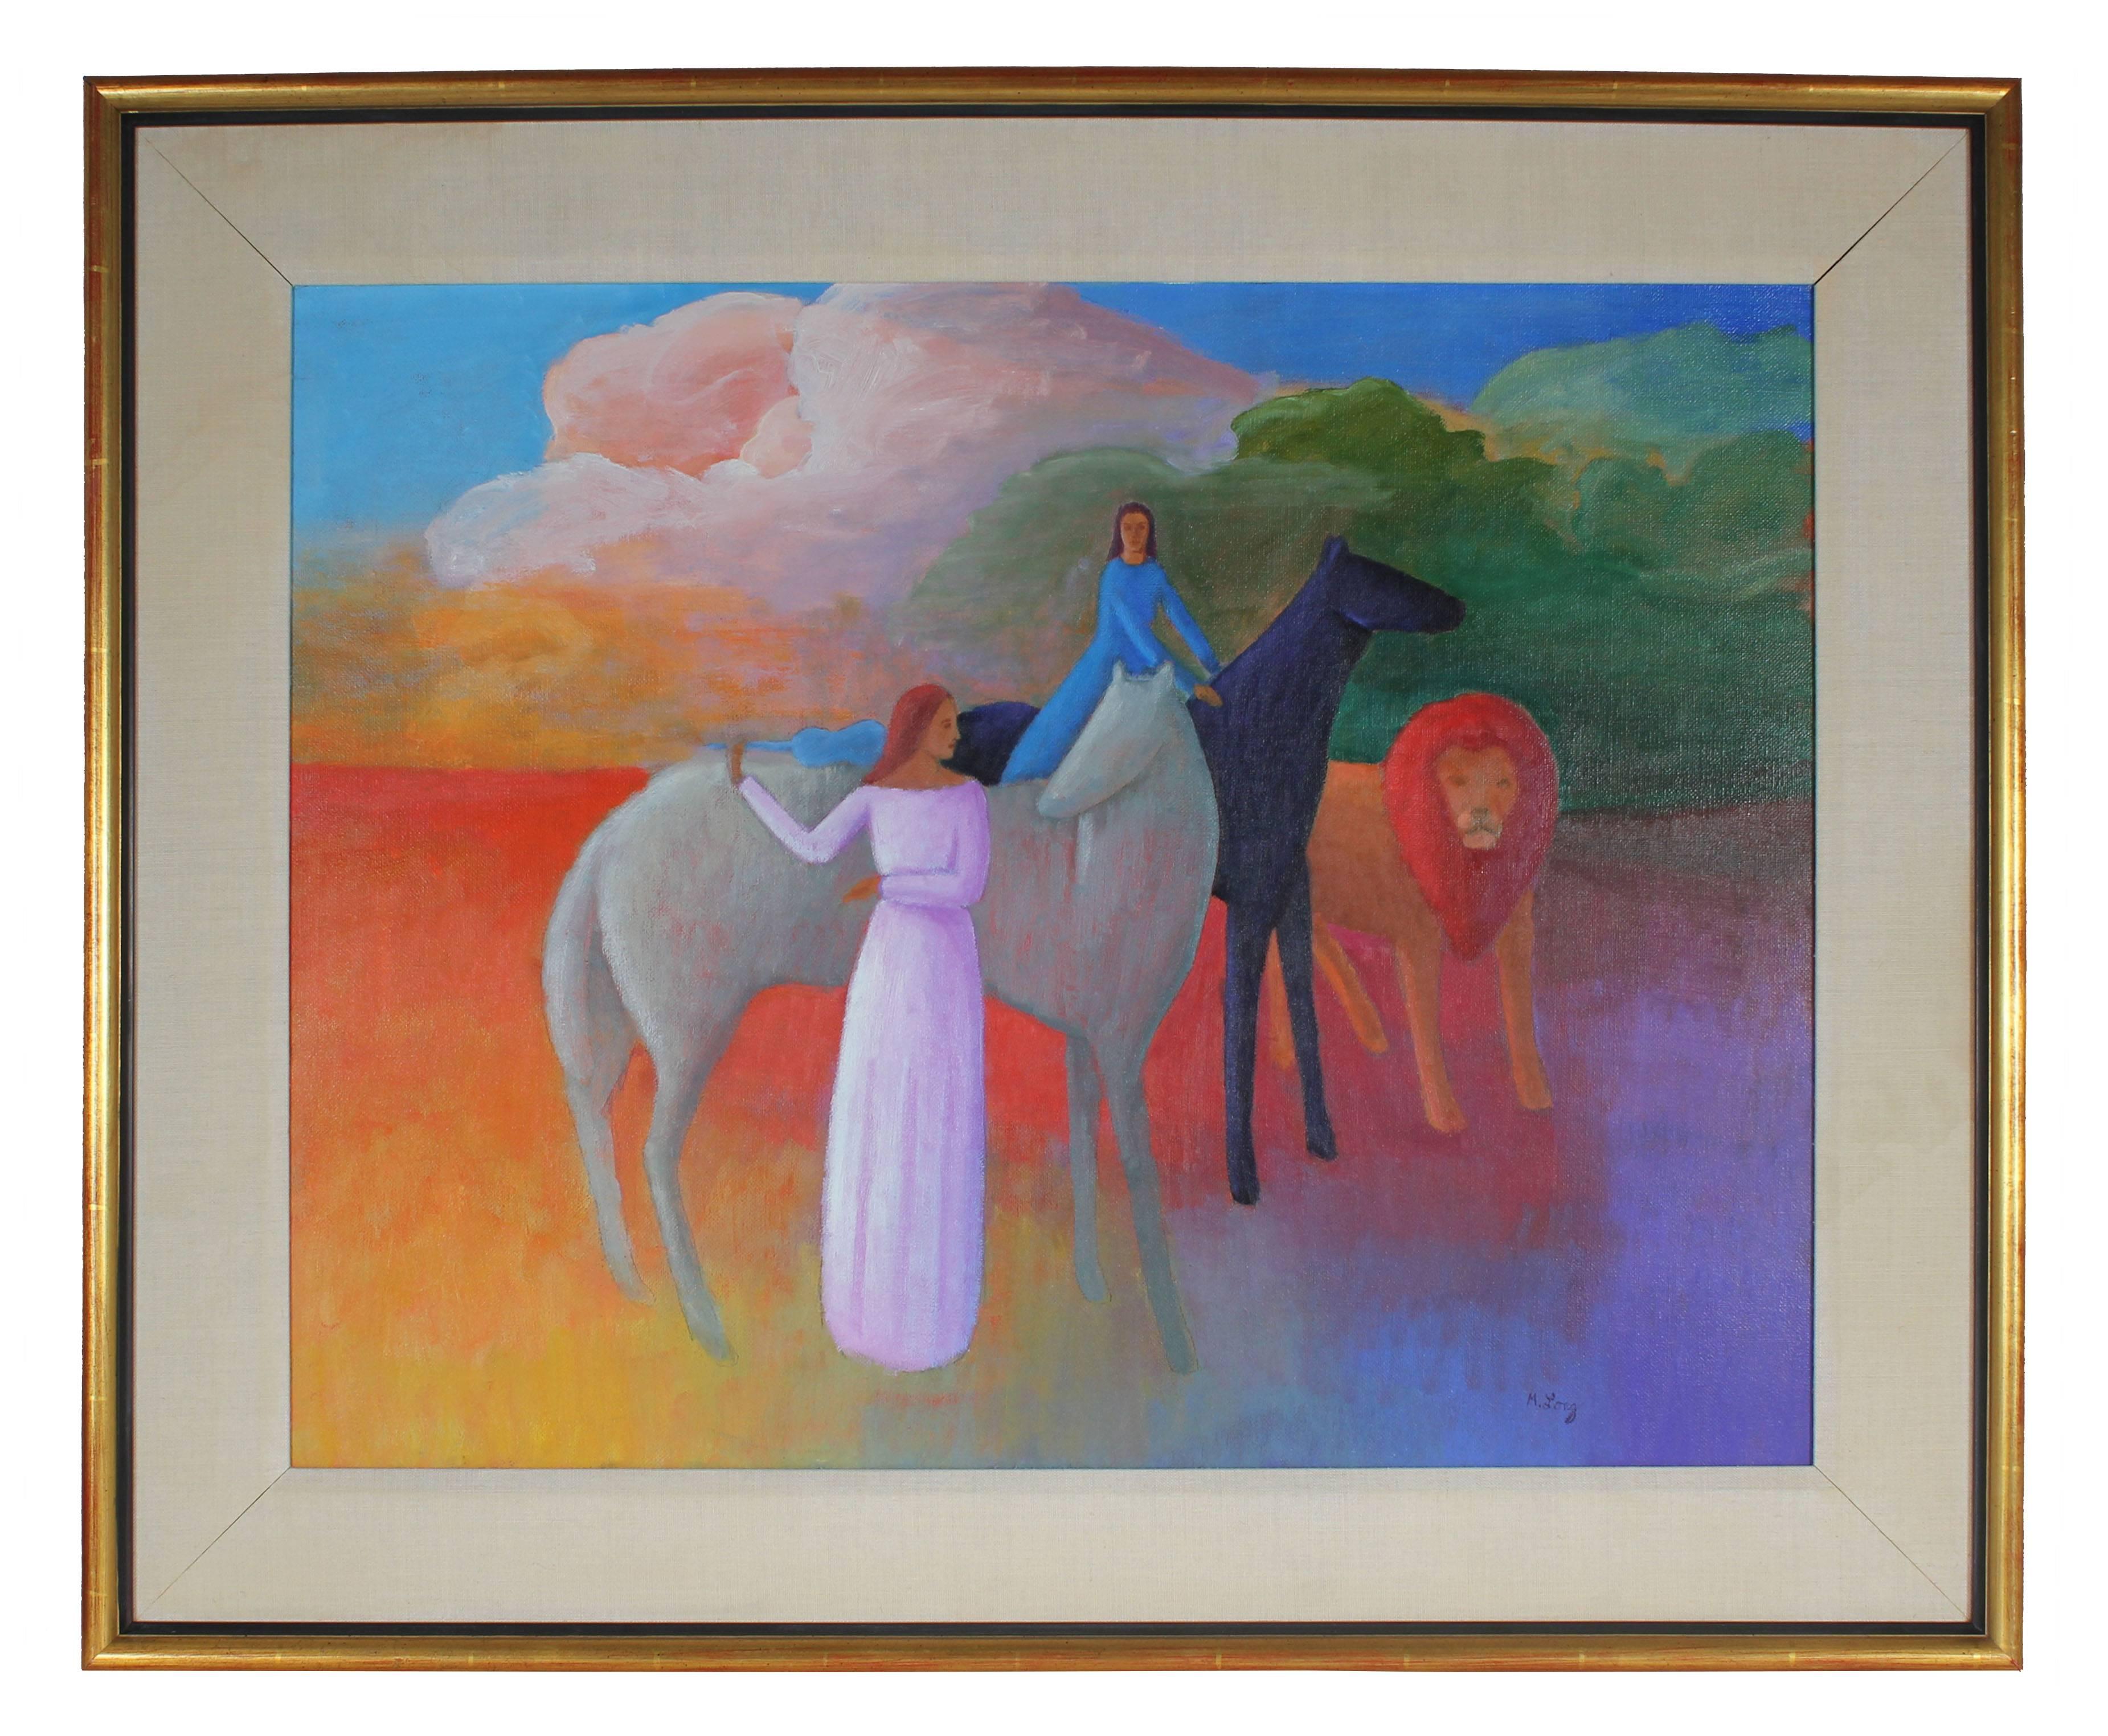 Michelle Long Figurative Painting - Symbolist Scene with Horses and Lion, Oil on Canvas